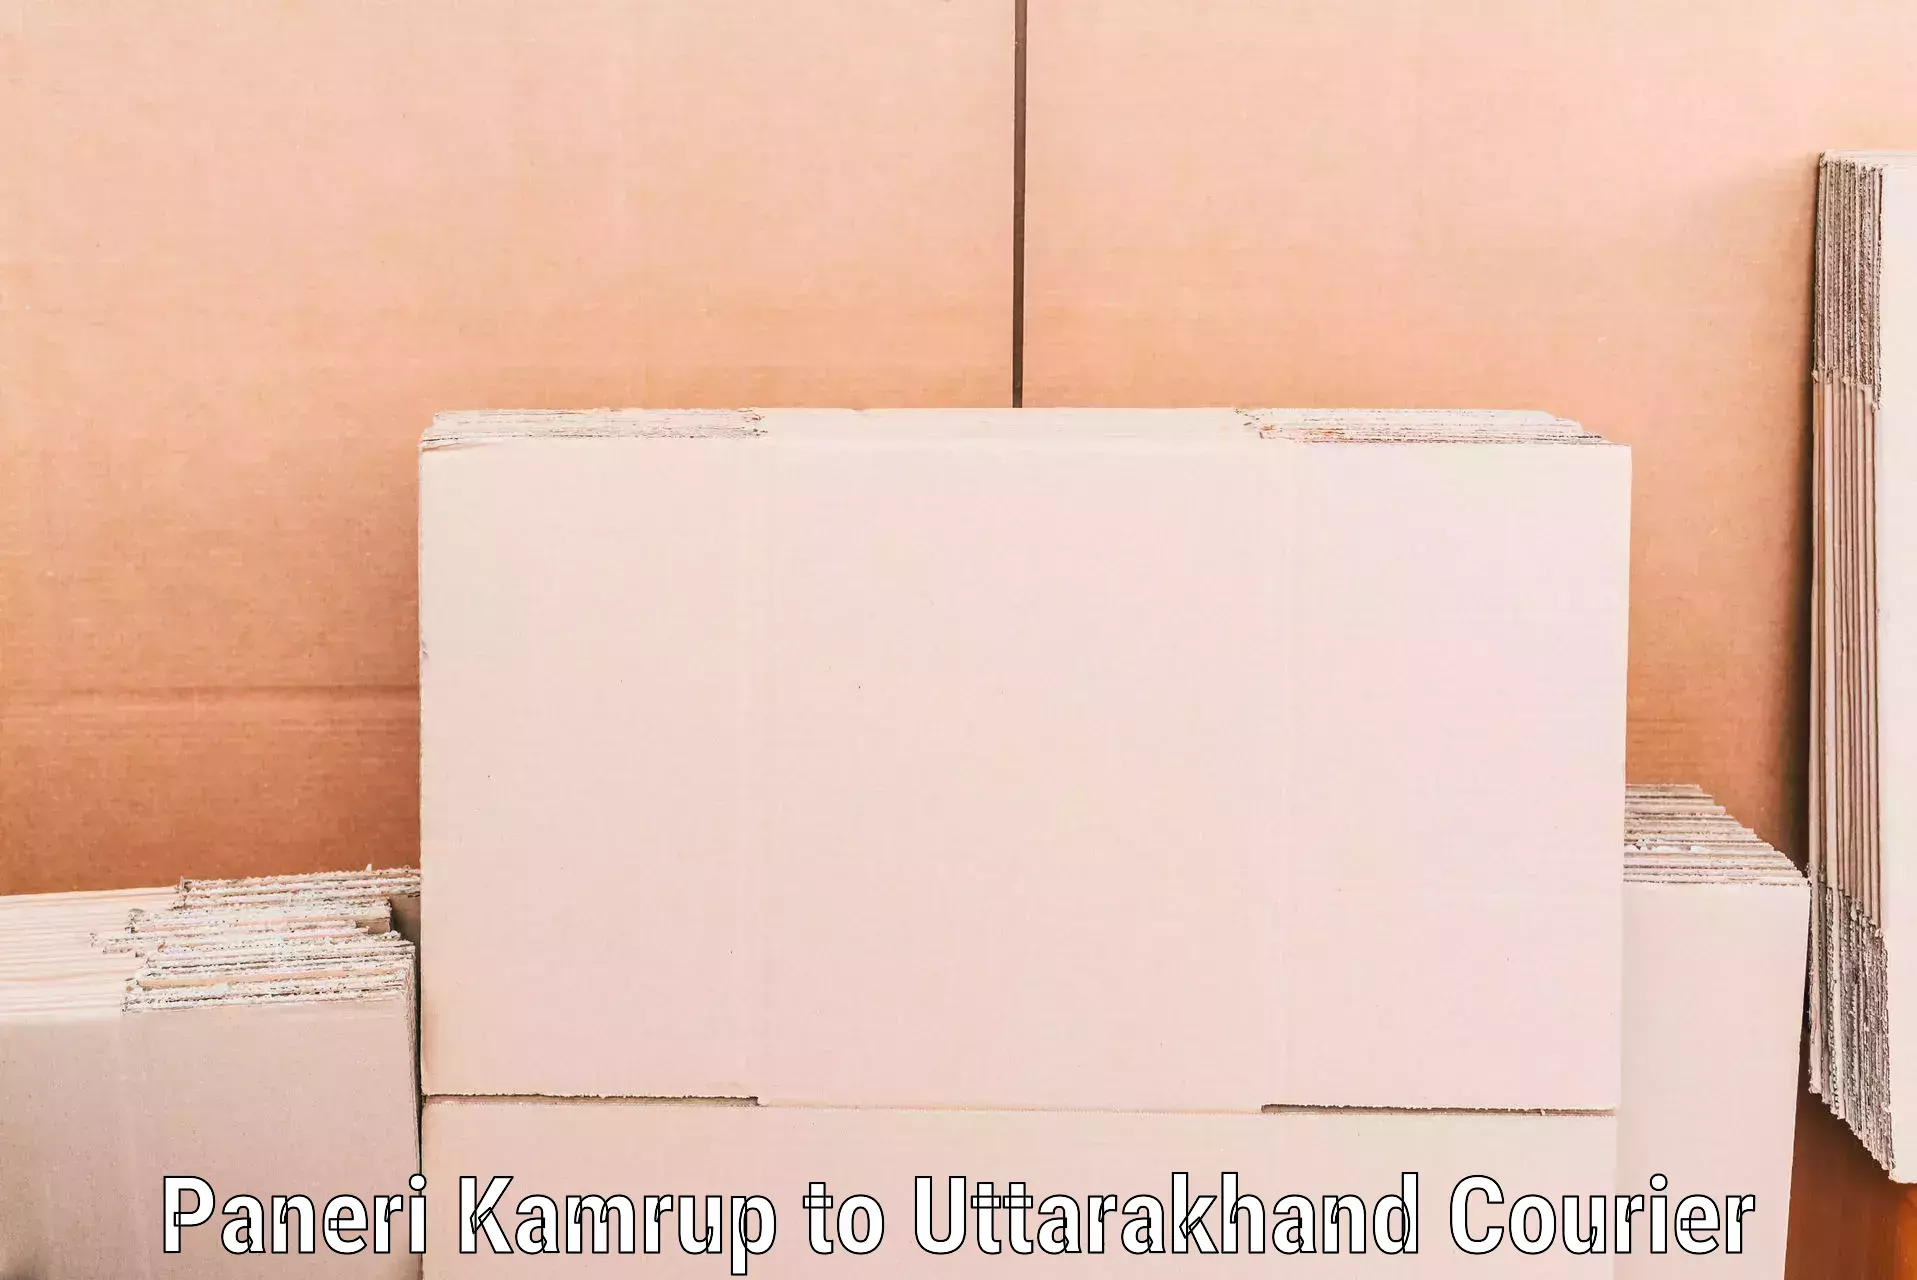 Quality moving and storage Paneri Kamrup to IIT Roorkee